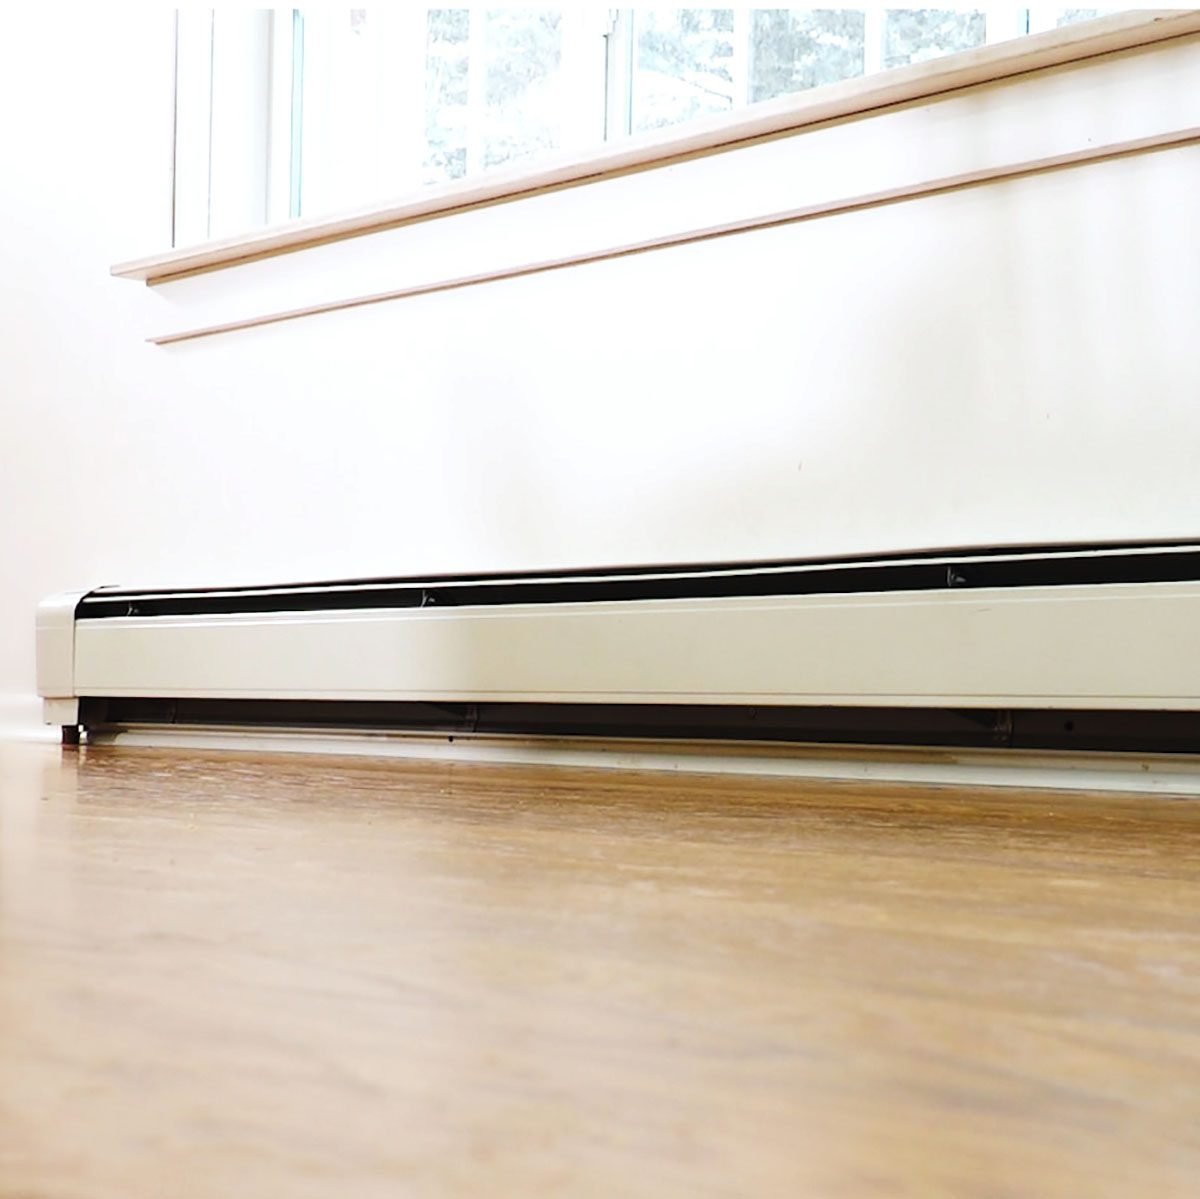 How to Clean Baseboard Heaters